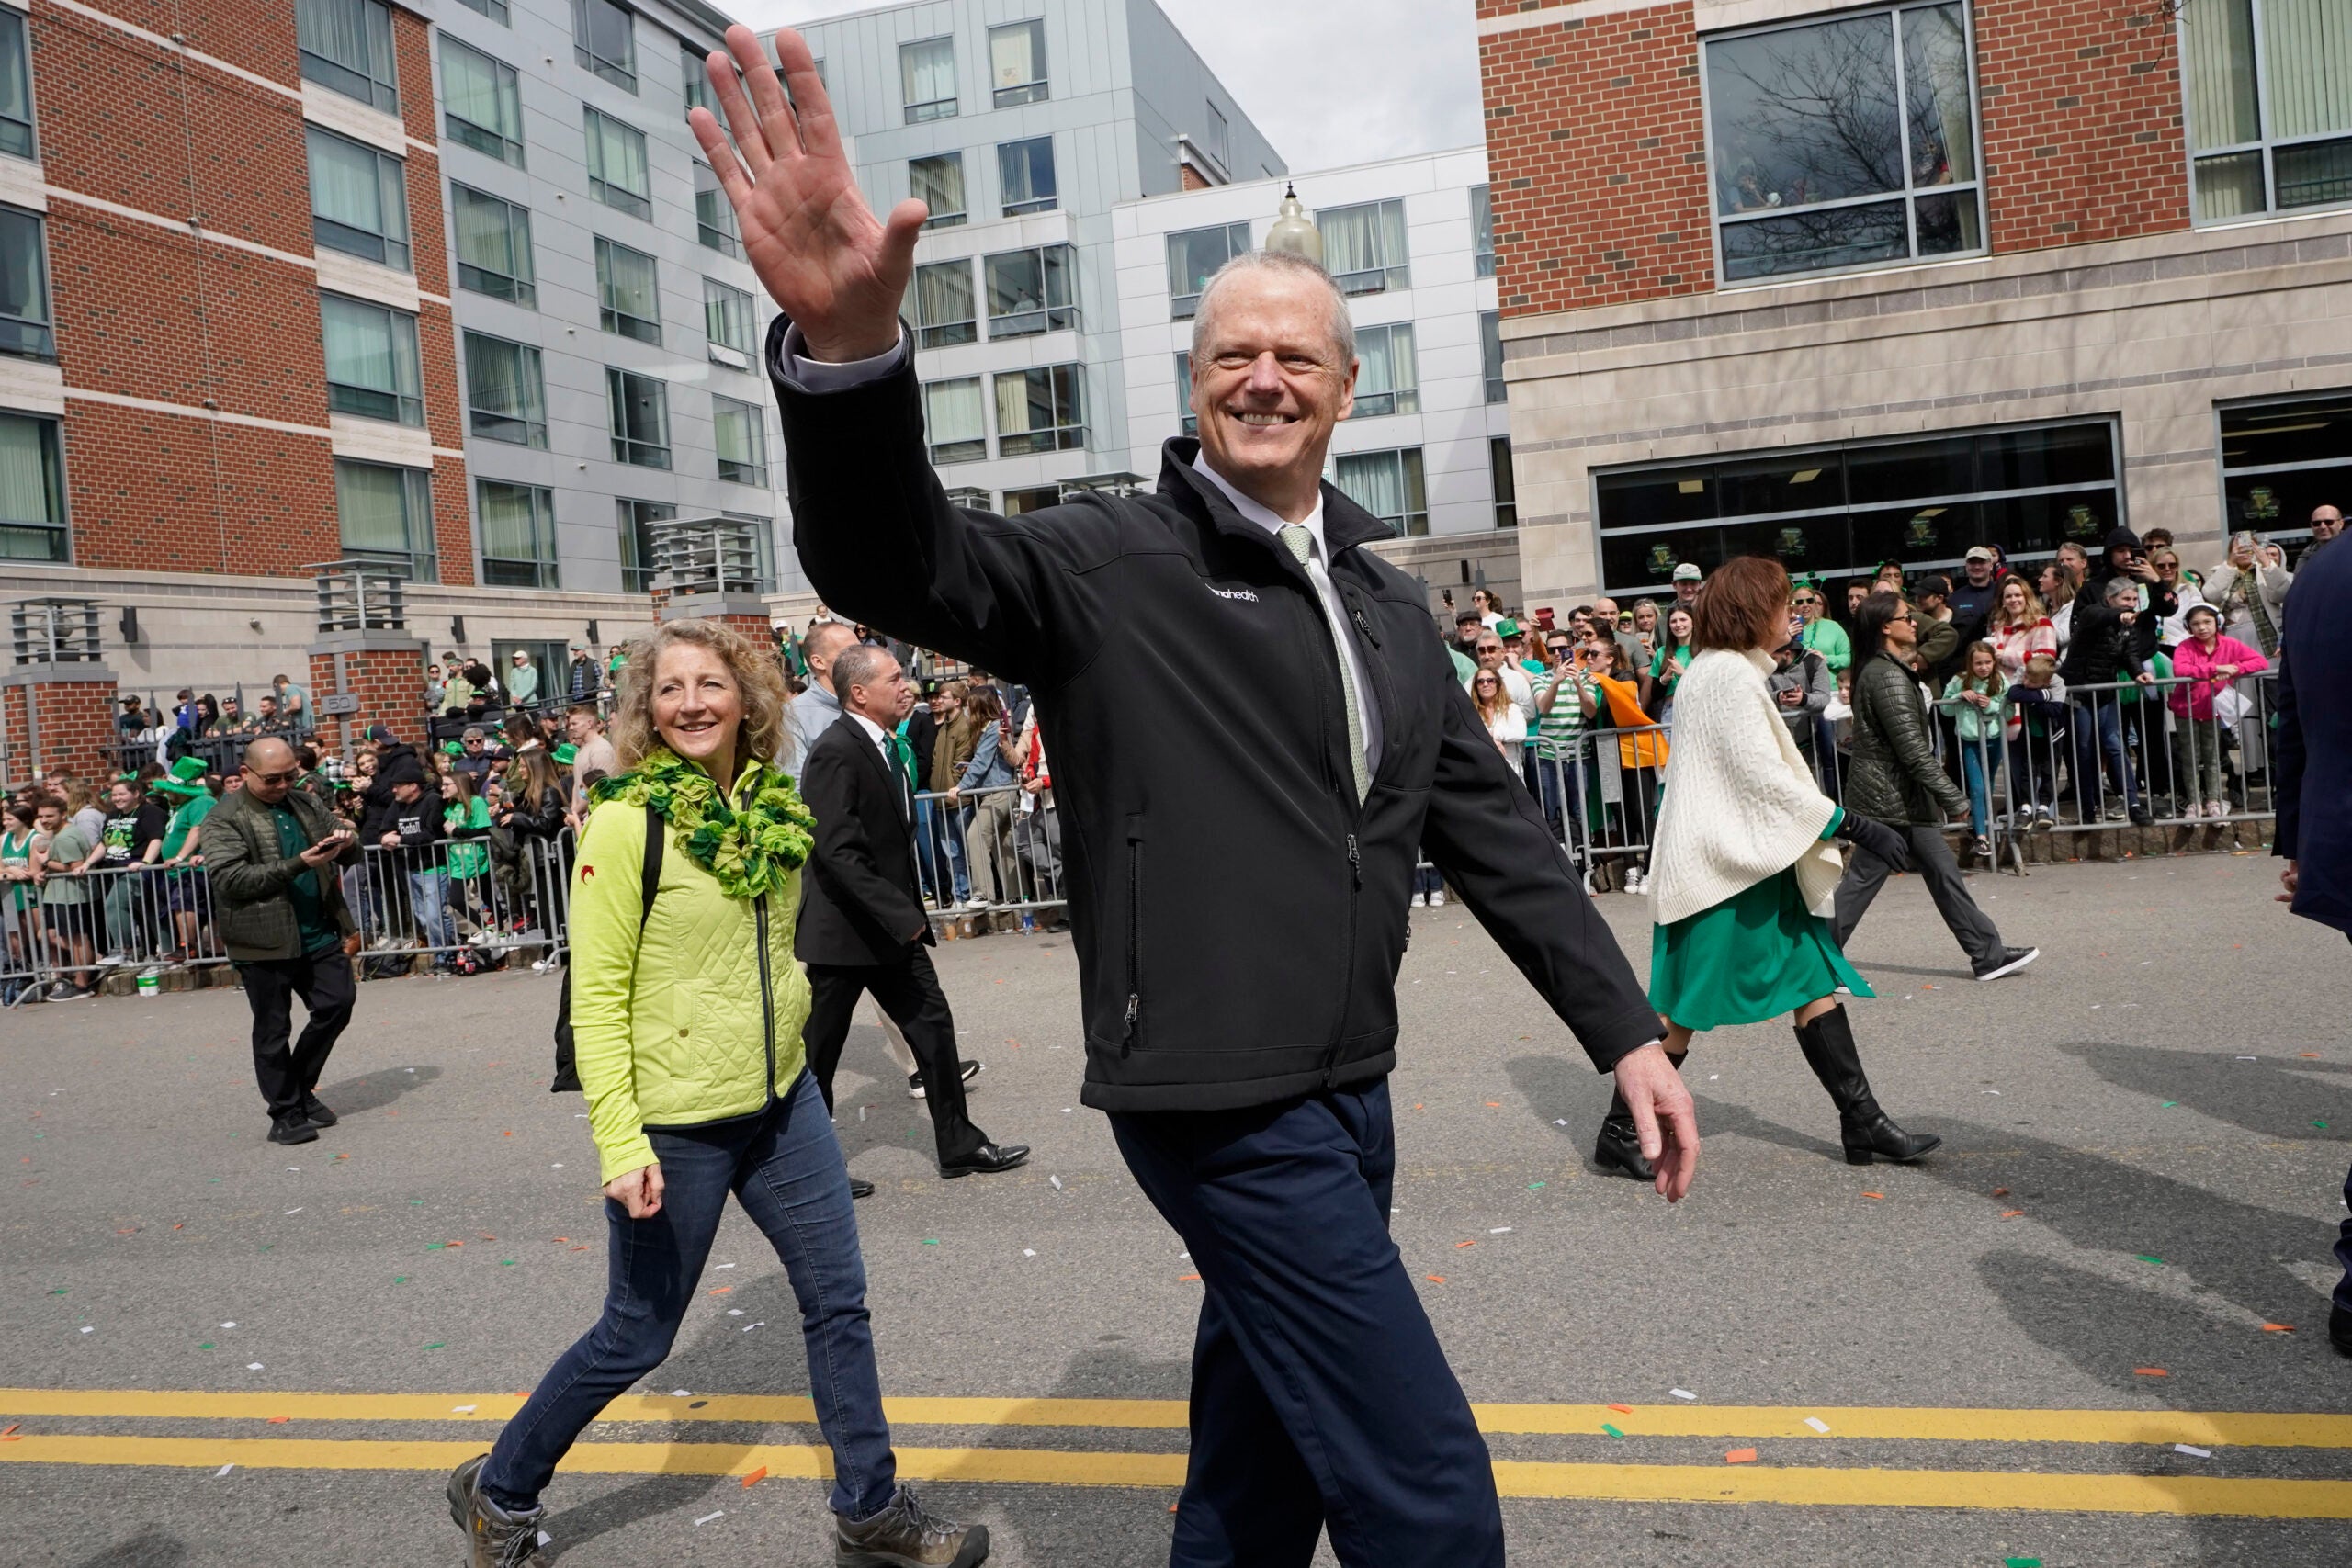 Charlie Baker waves to crowd at St. Patrick's Day Parade in Boston